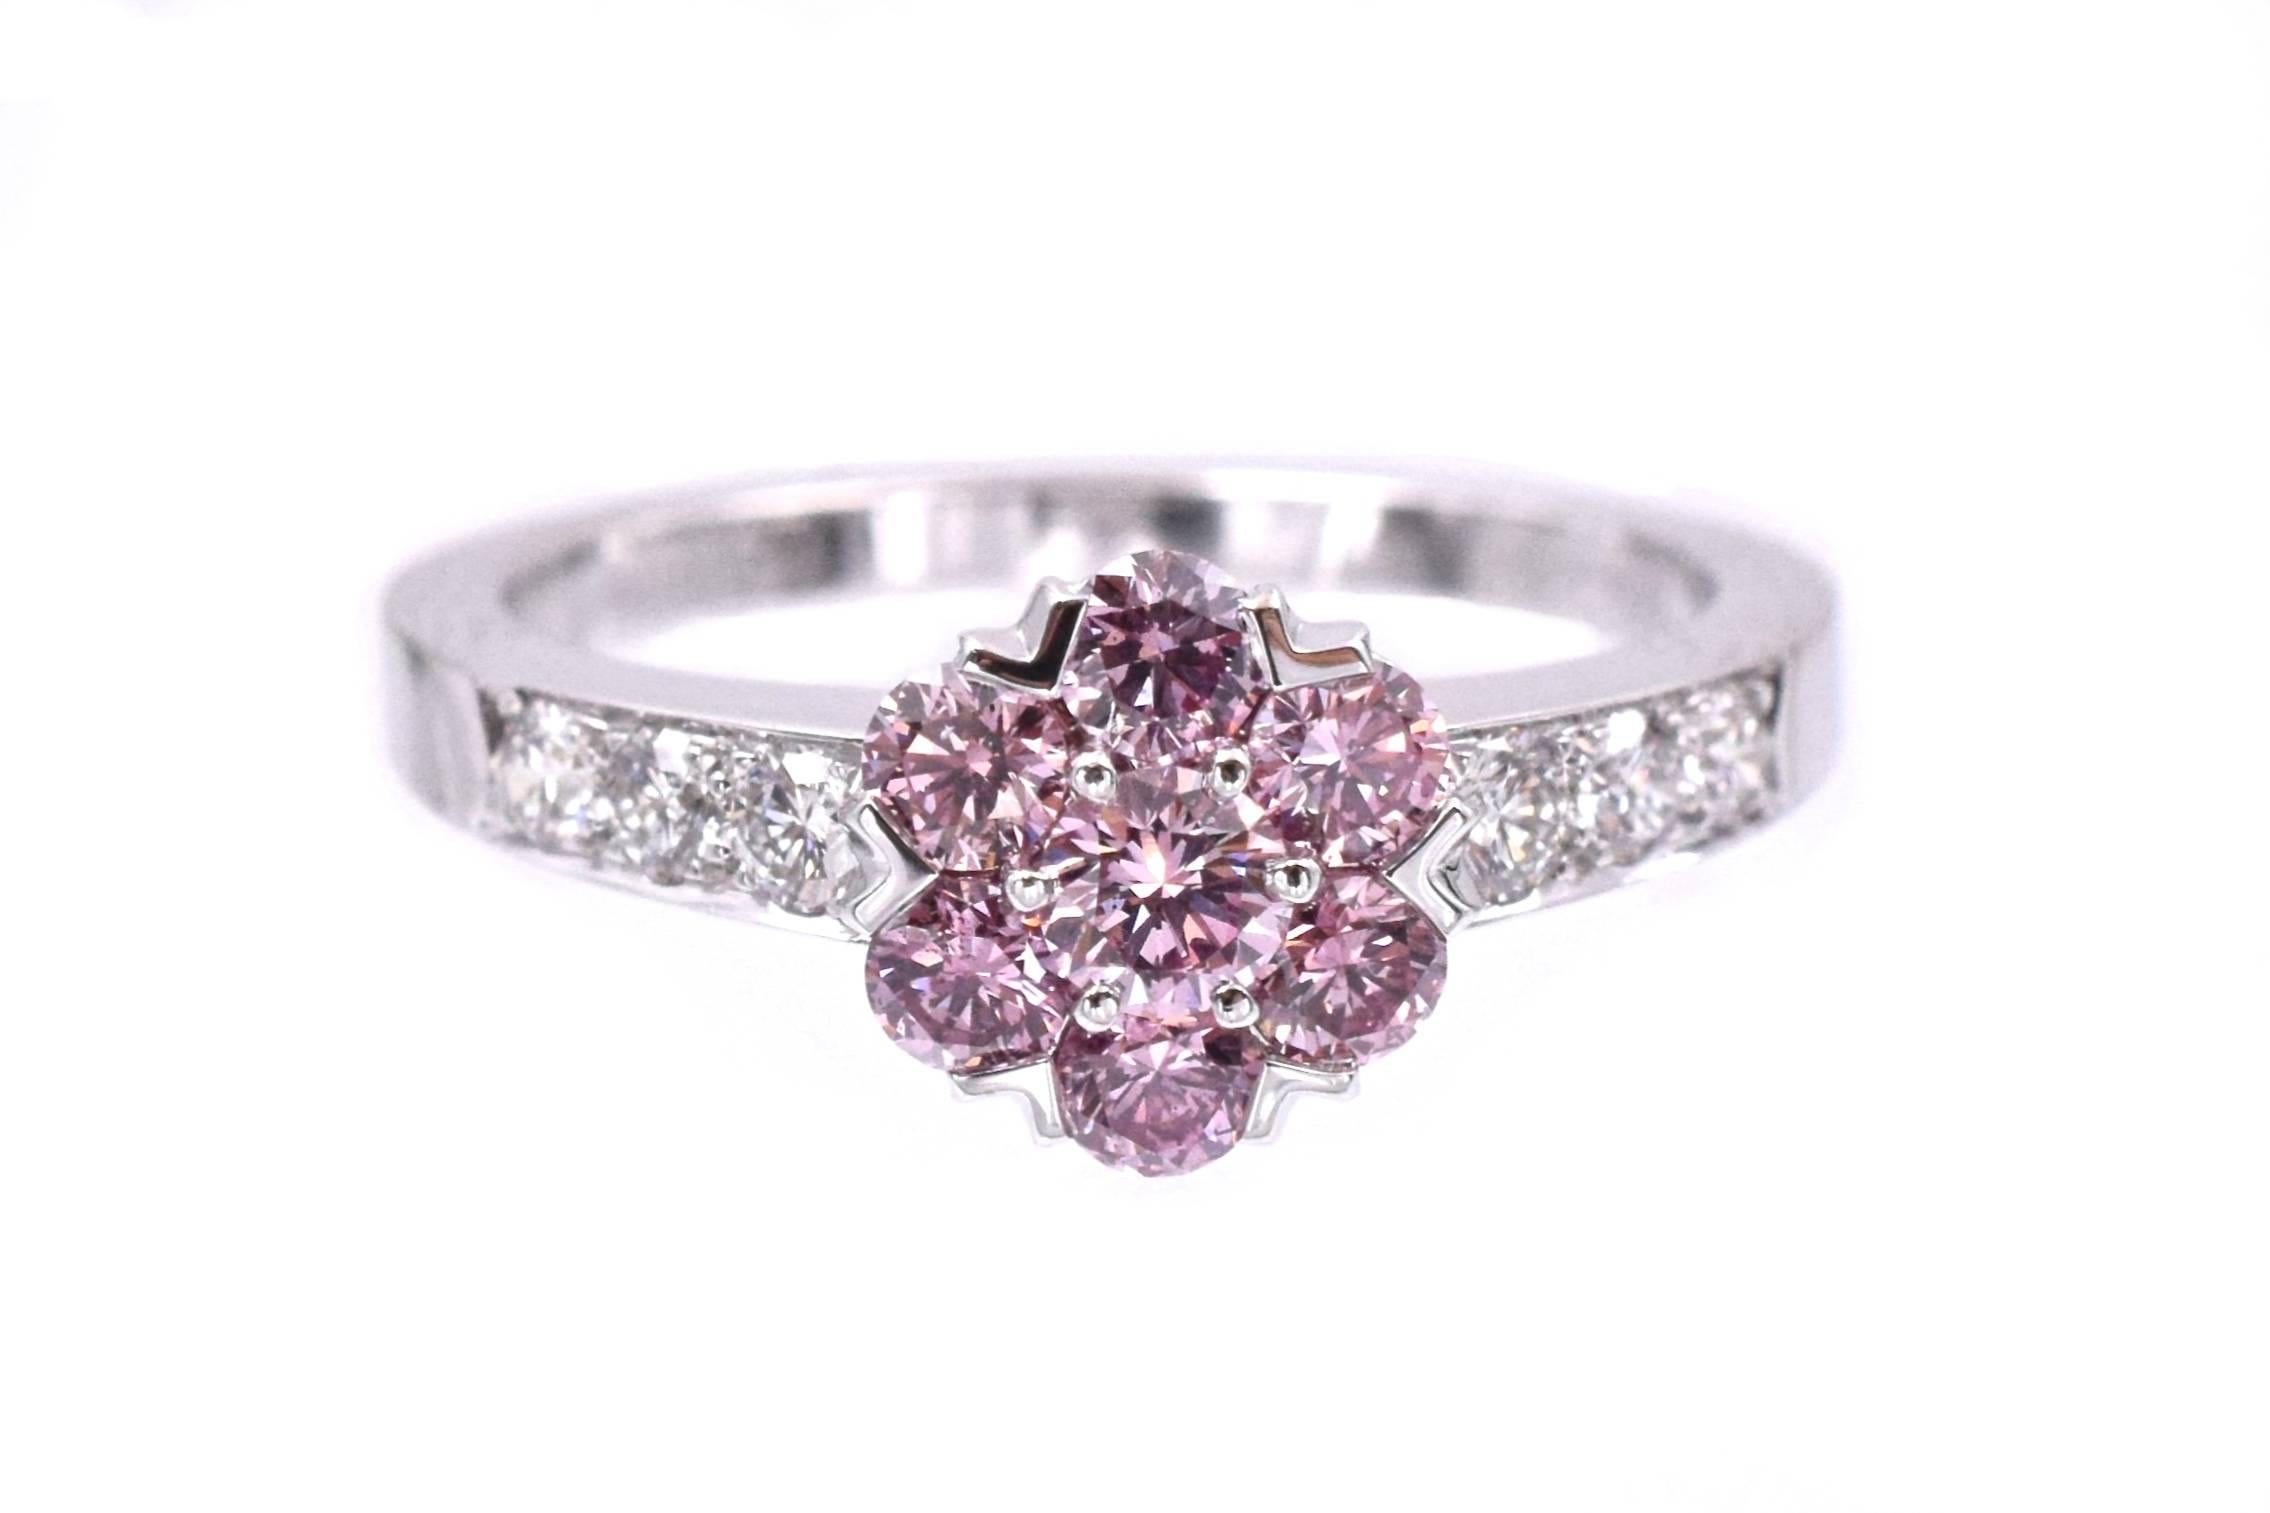 Van Cleef and Arpels Fancy Intense Pink Diamond “Fleurette” Ring
This ring has one Fancy Intense Pink brilliant-cut diamond, weighing 0.14 carats, six Fancy Intense Pink brilliant-cut diamonds, weighing 0.42 carats total, flanked by six round-cut